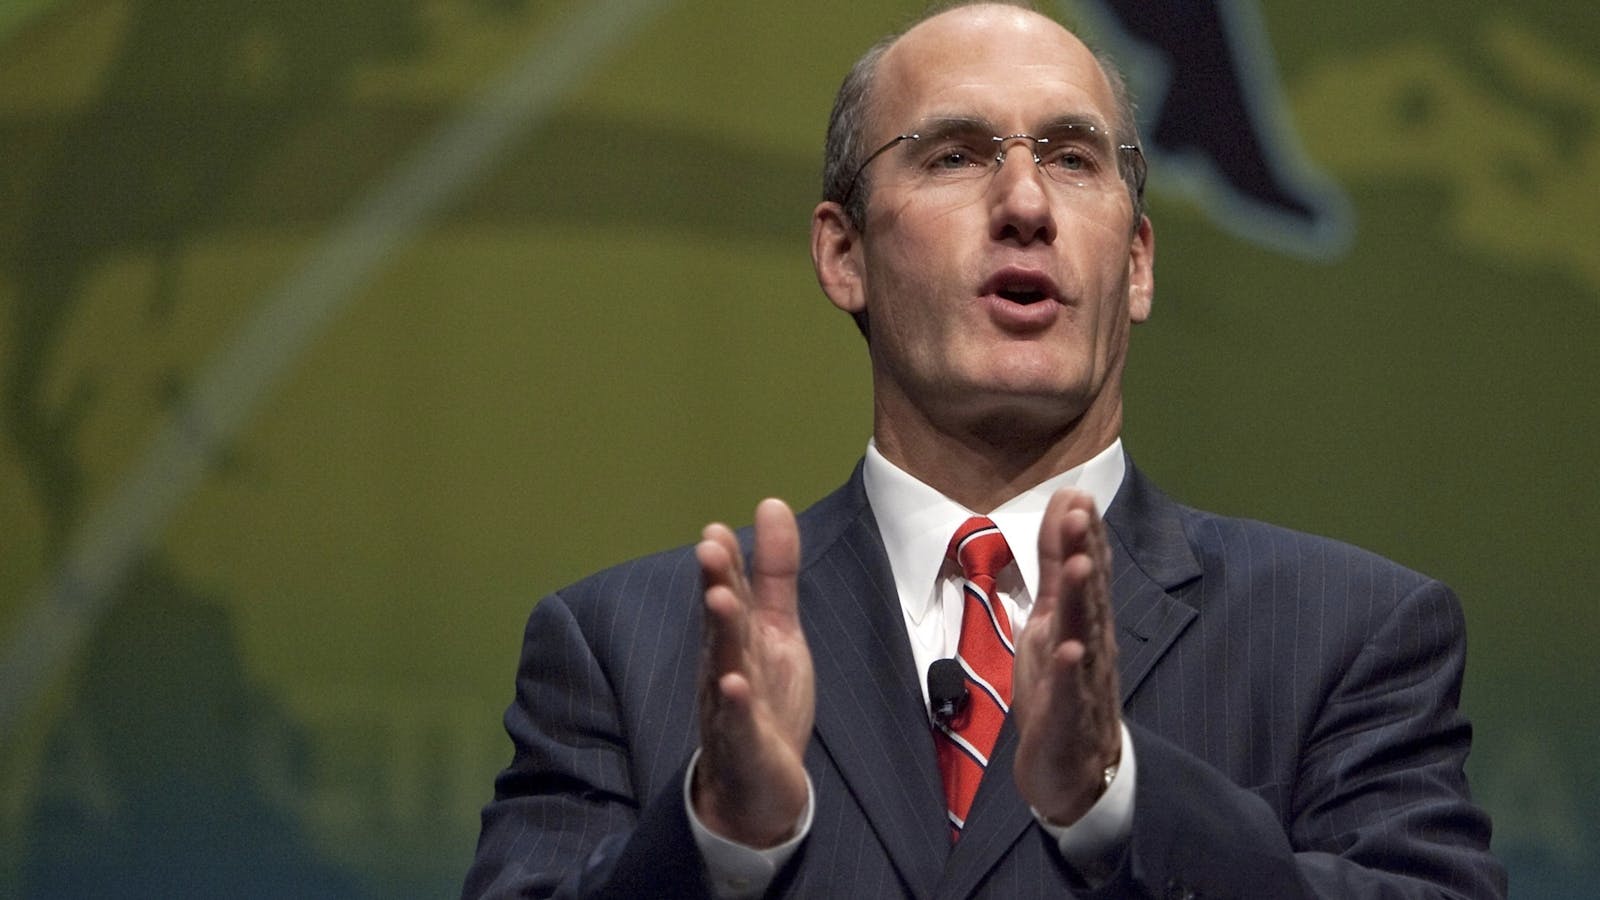 AT&T CEO John Stankey. Photo by Bloomberg.